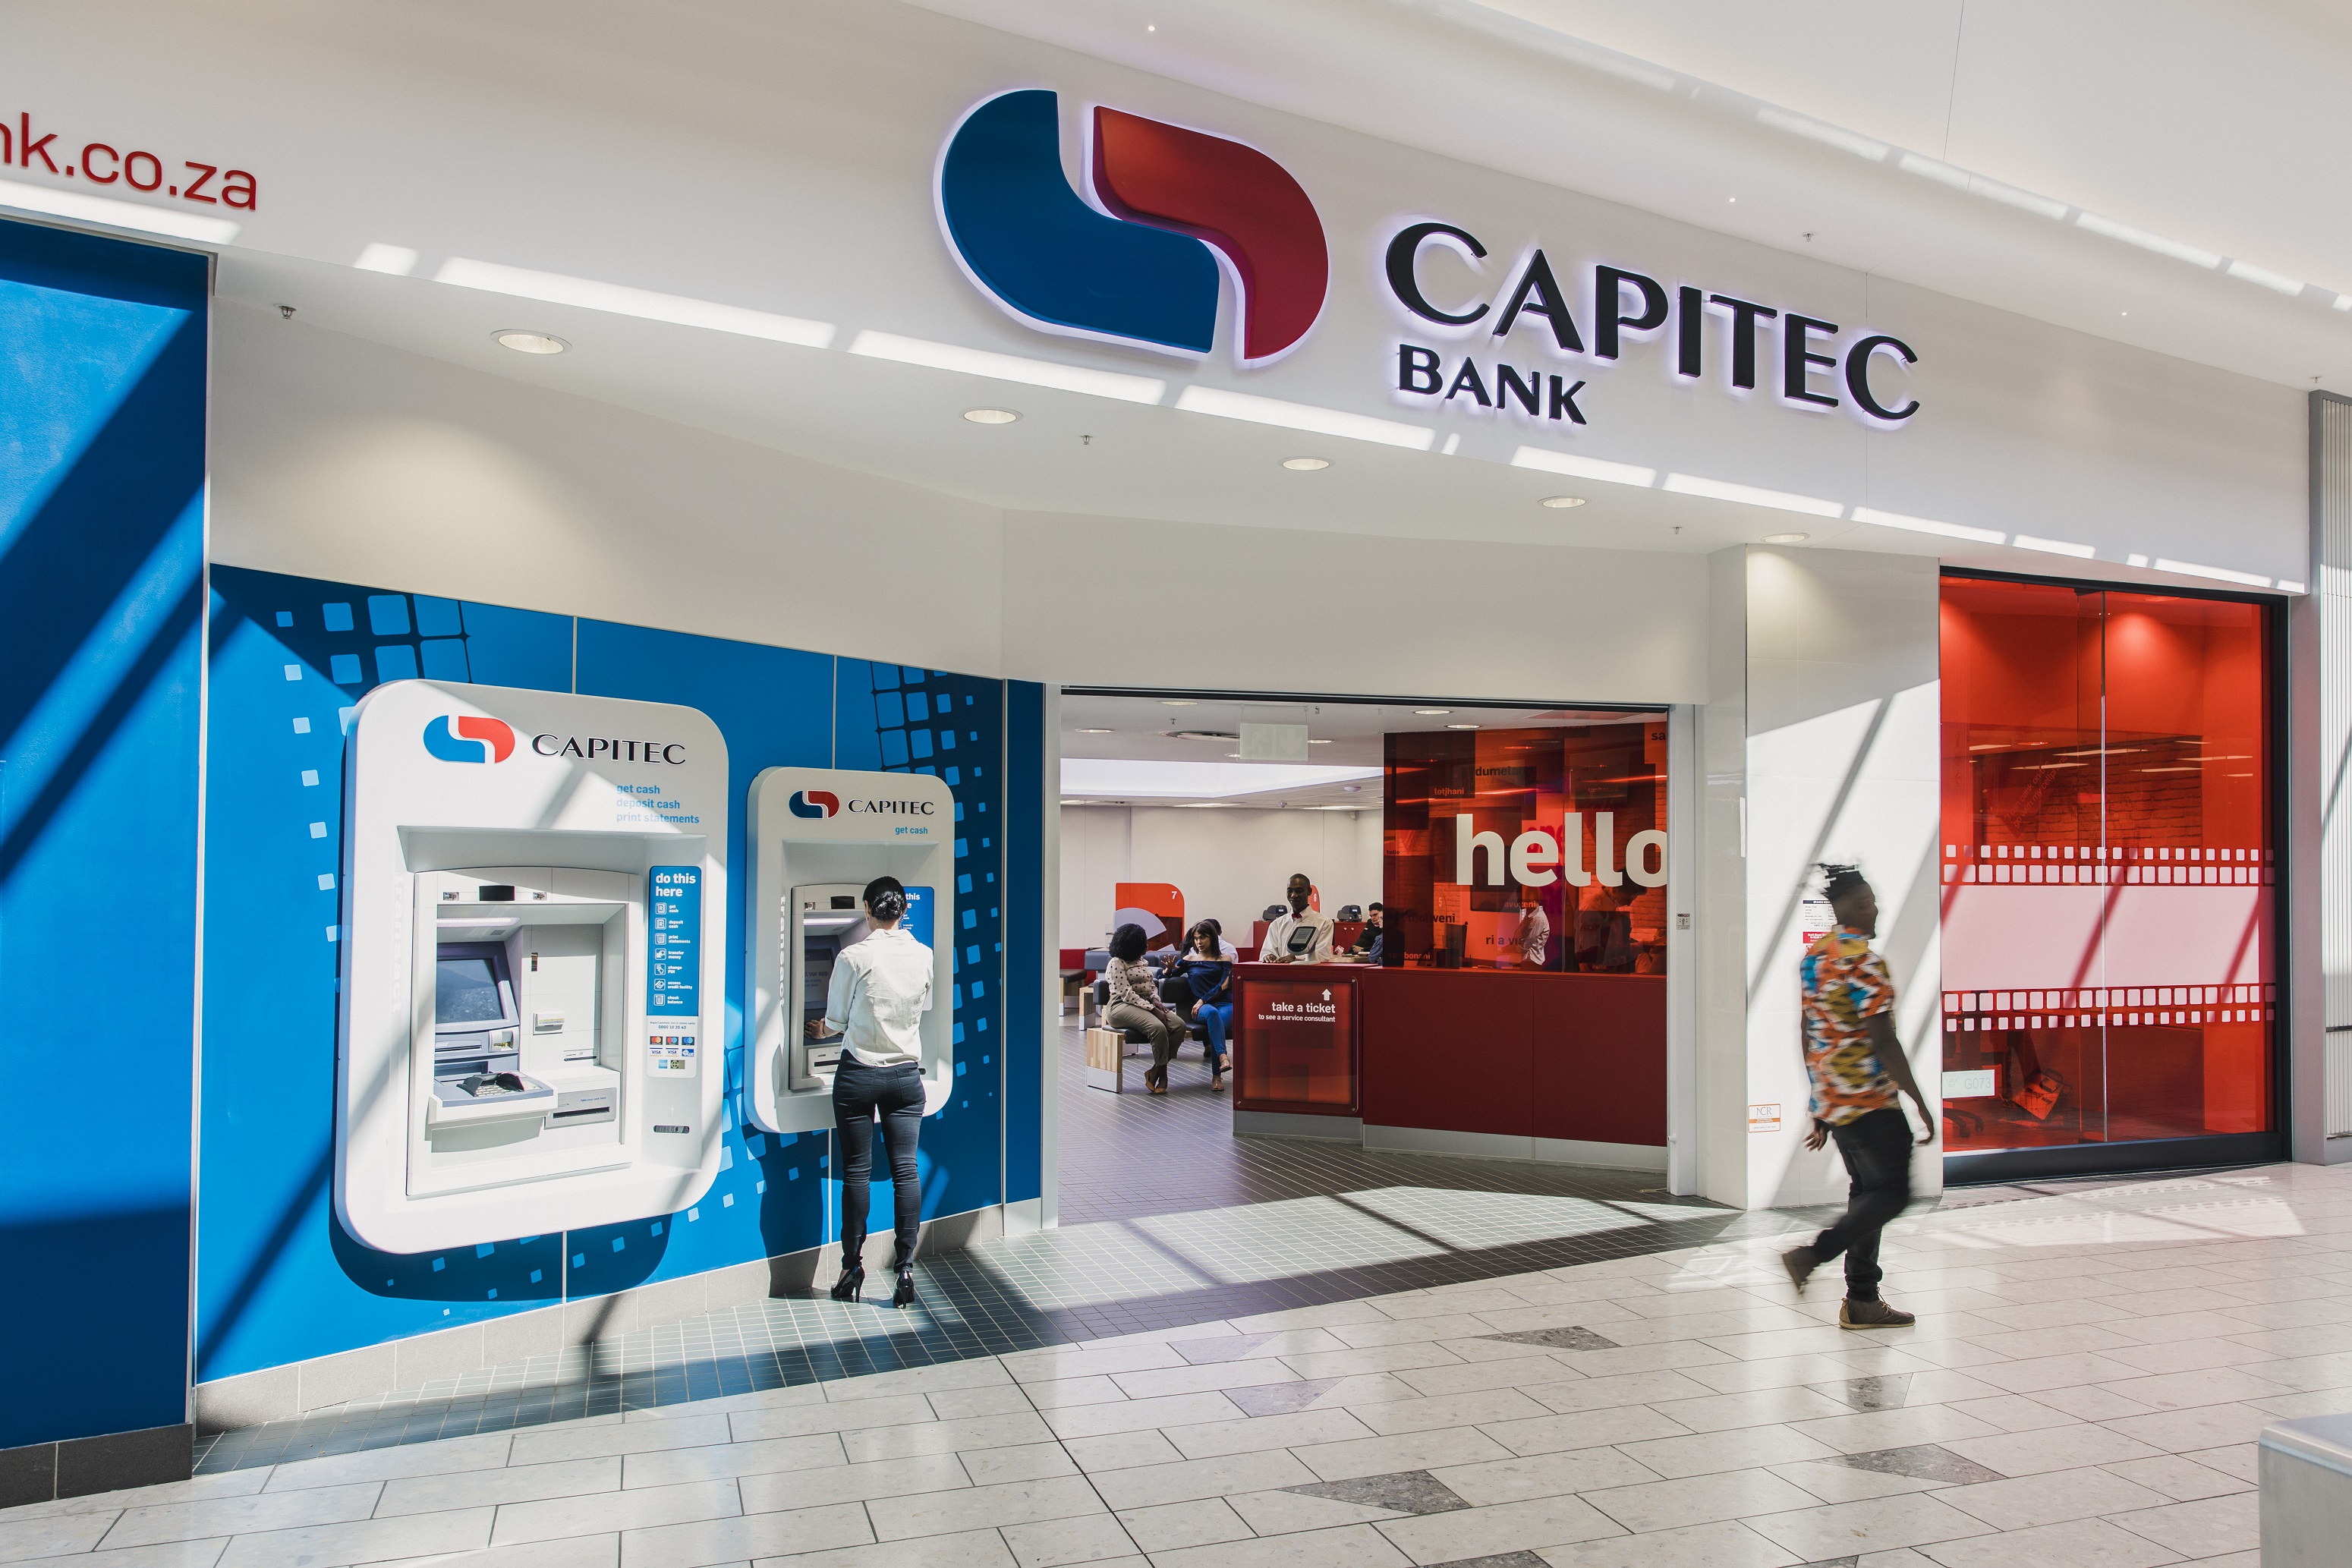 Capitec Transforms Operational Capabilities with SAP S/4HANA to Keep Pace with Rapid Growth